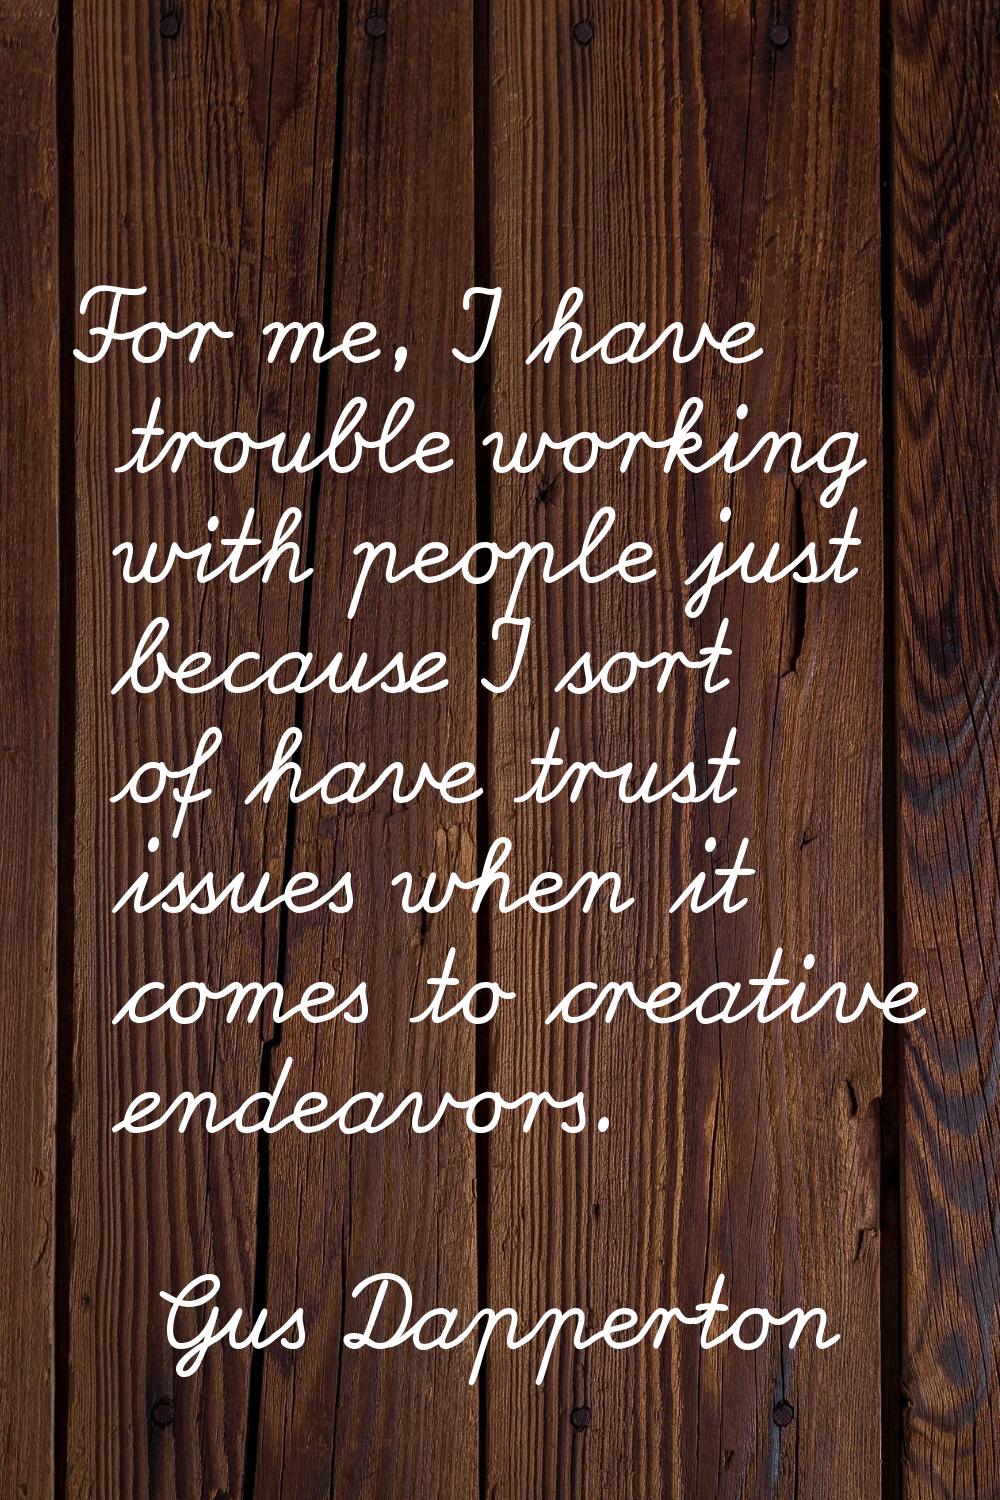 For me, I have trouble working with people just because I sort of have trust issues when it comes t